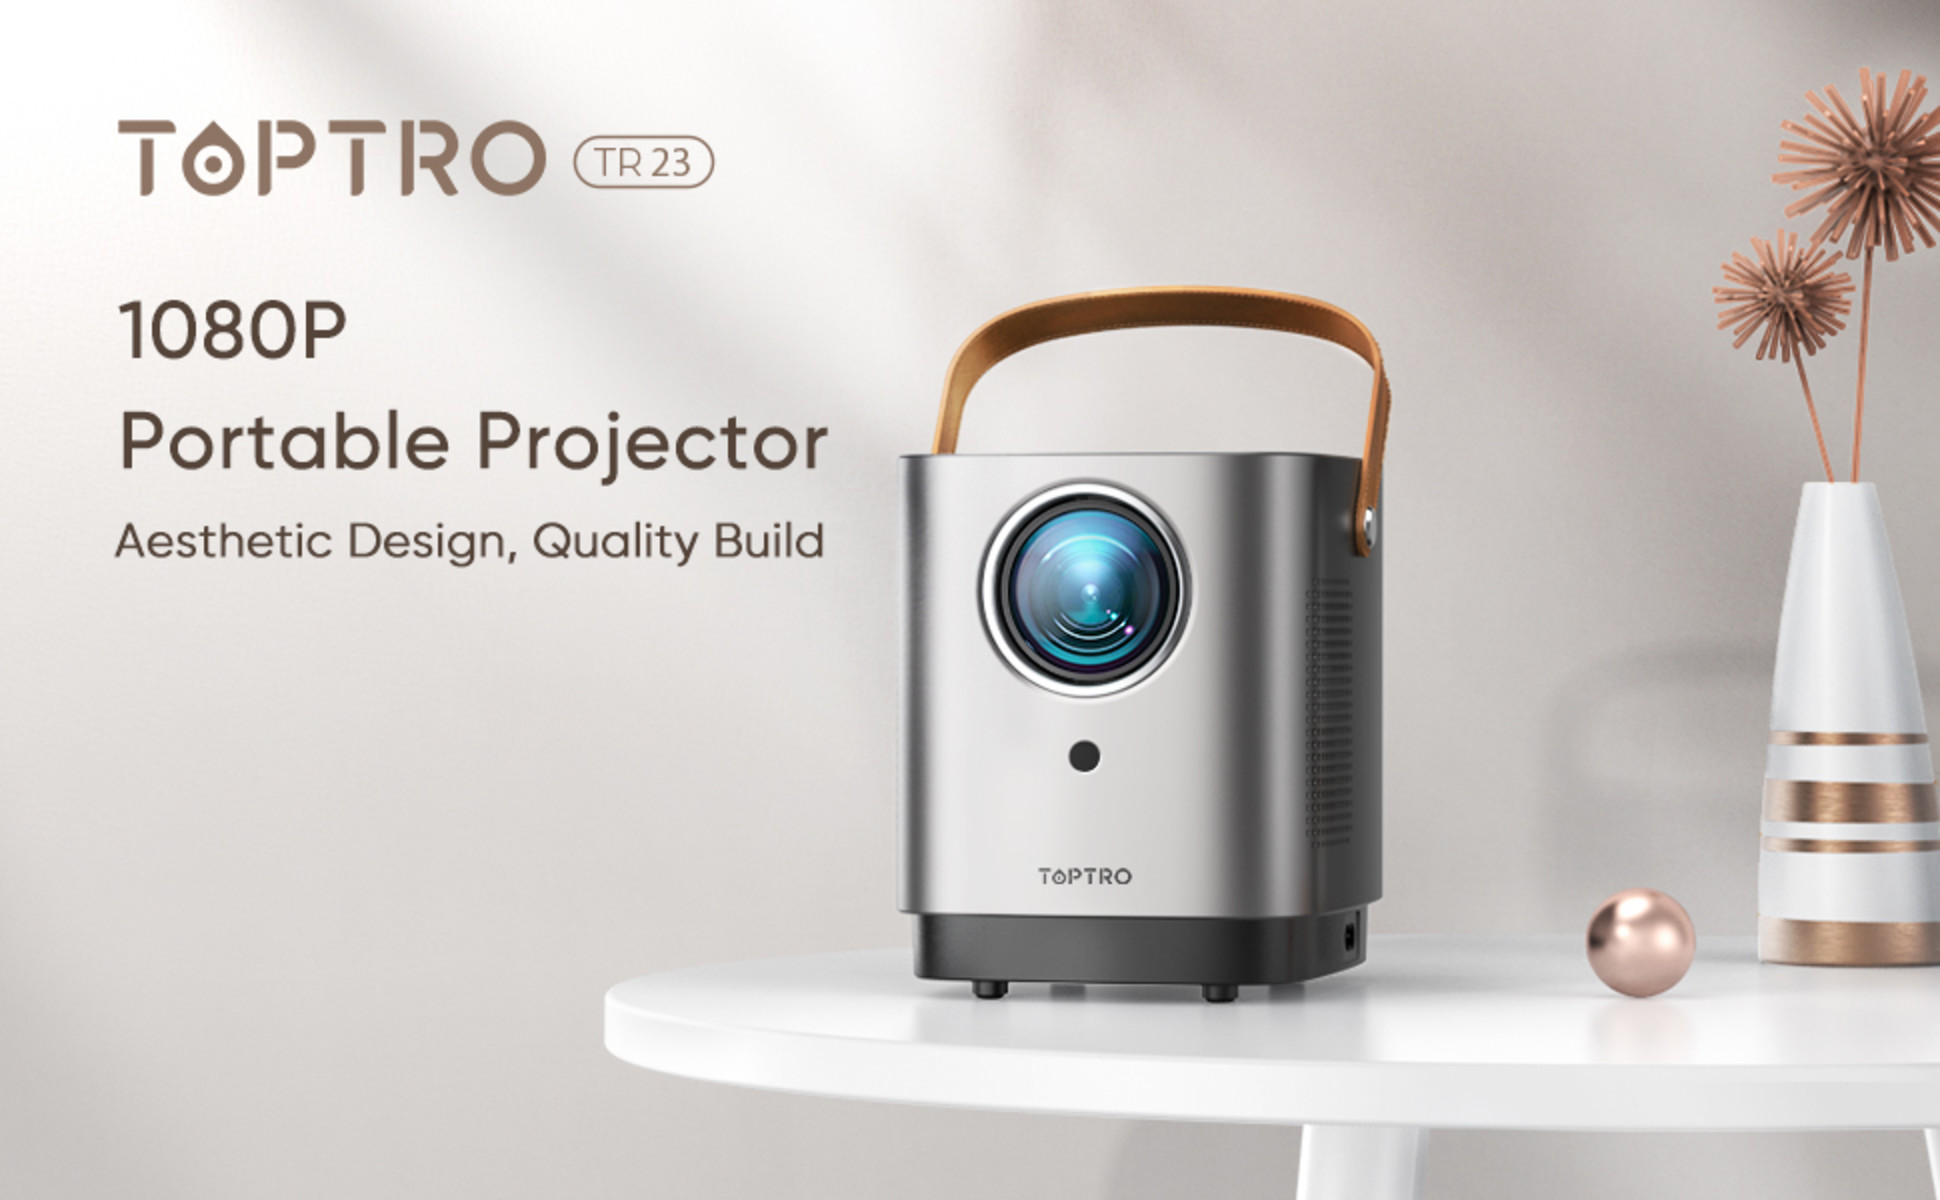 TOPTRO Projector TR25 Portable Projector 9500 Lumens Support 1080p Smart TV  WIFI Bluetooth Projectors for Home Outdoor Cinema - AliExpress